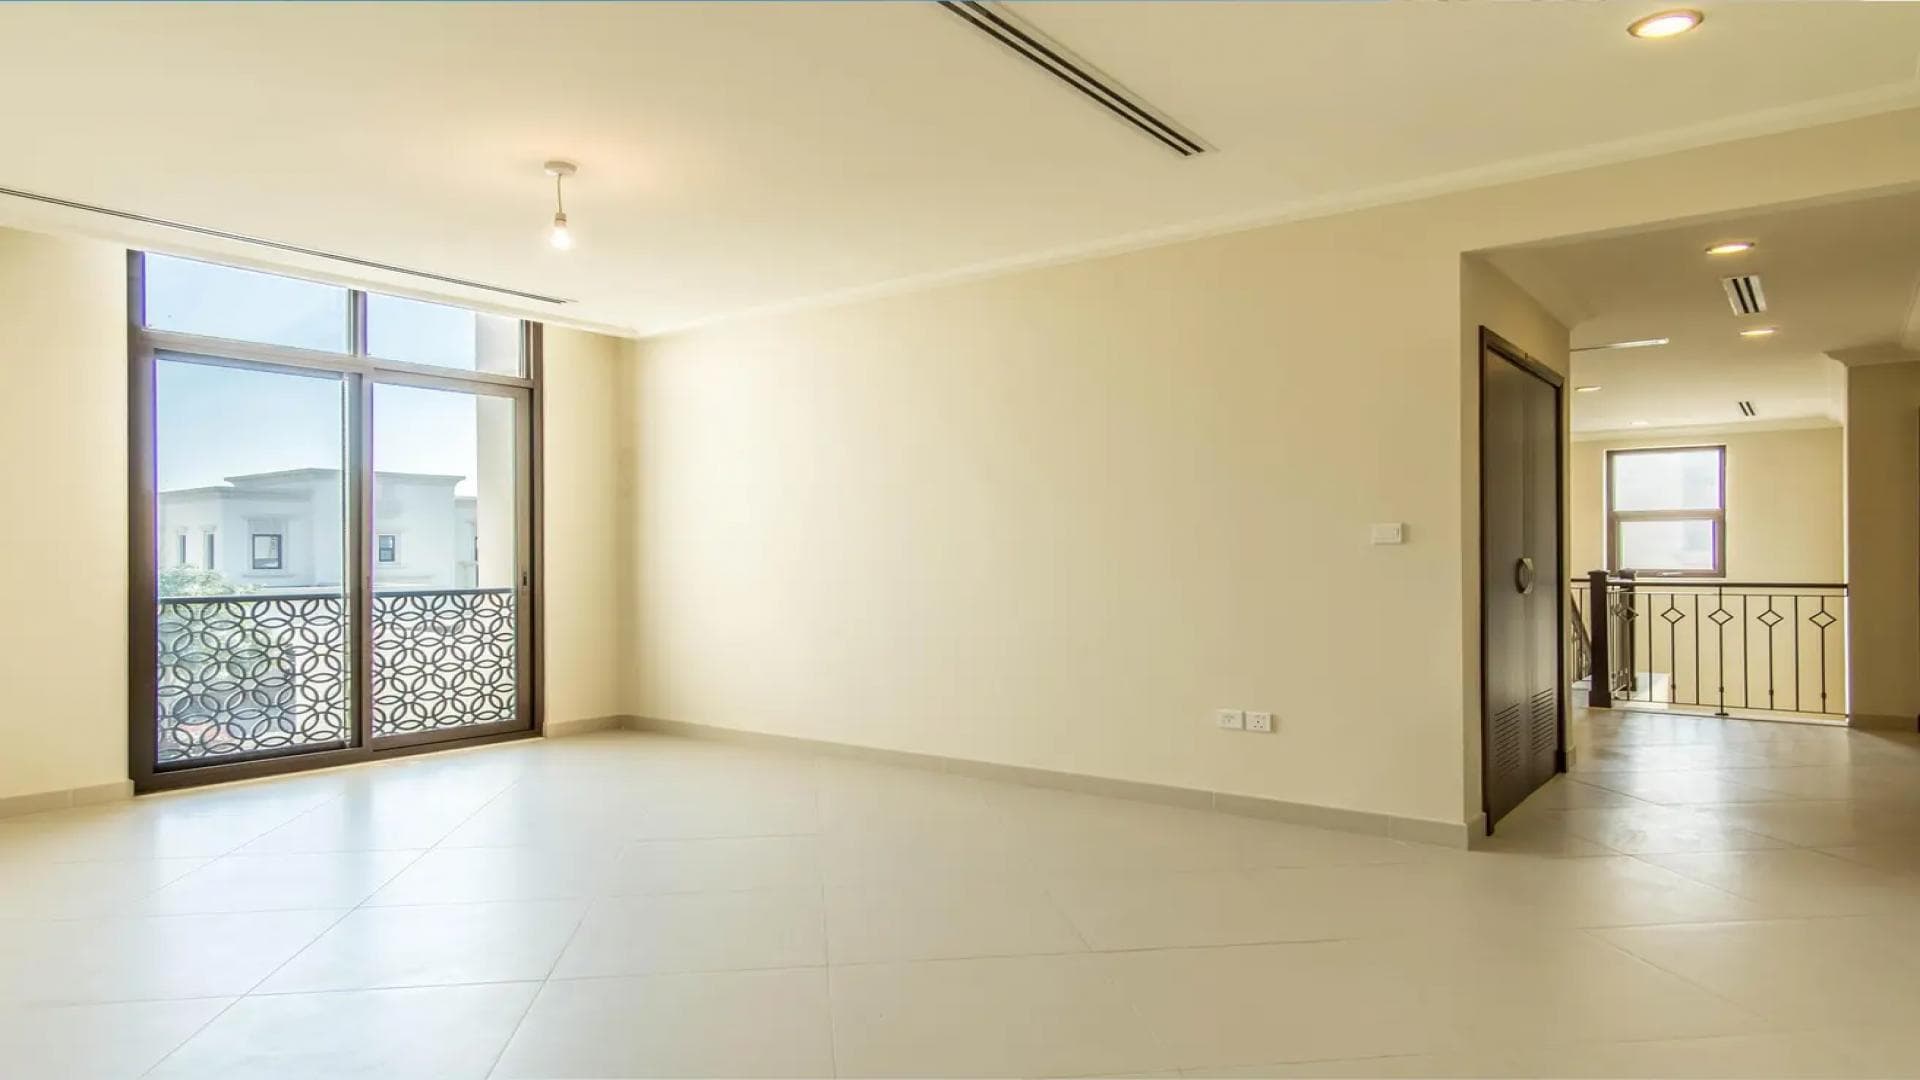 5 Bedroom Townhouse For Rent Al Bateen Residence Lp27777 176ff80aea500b00.png